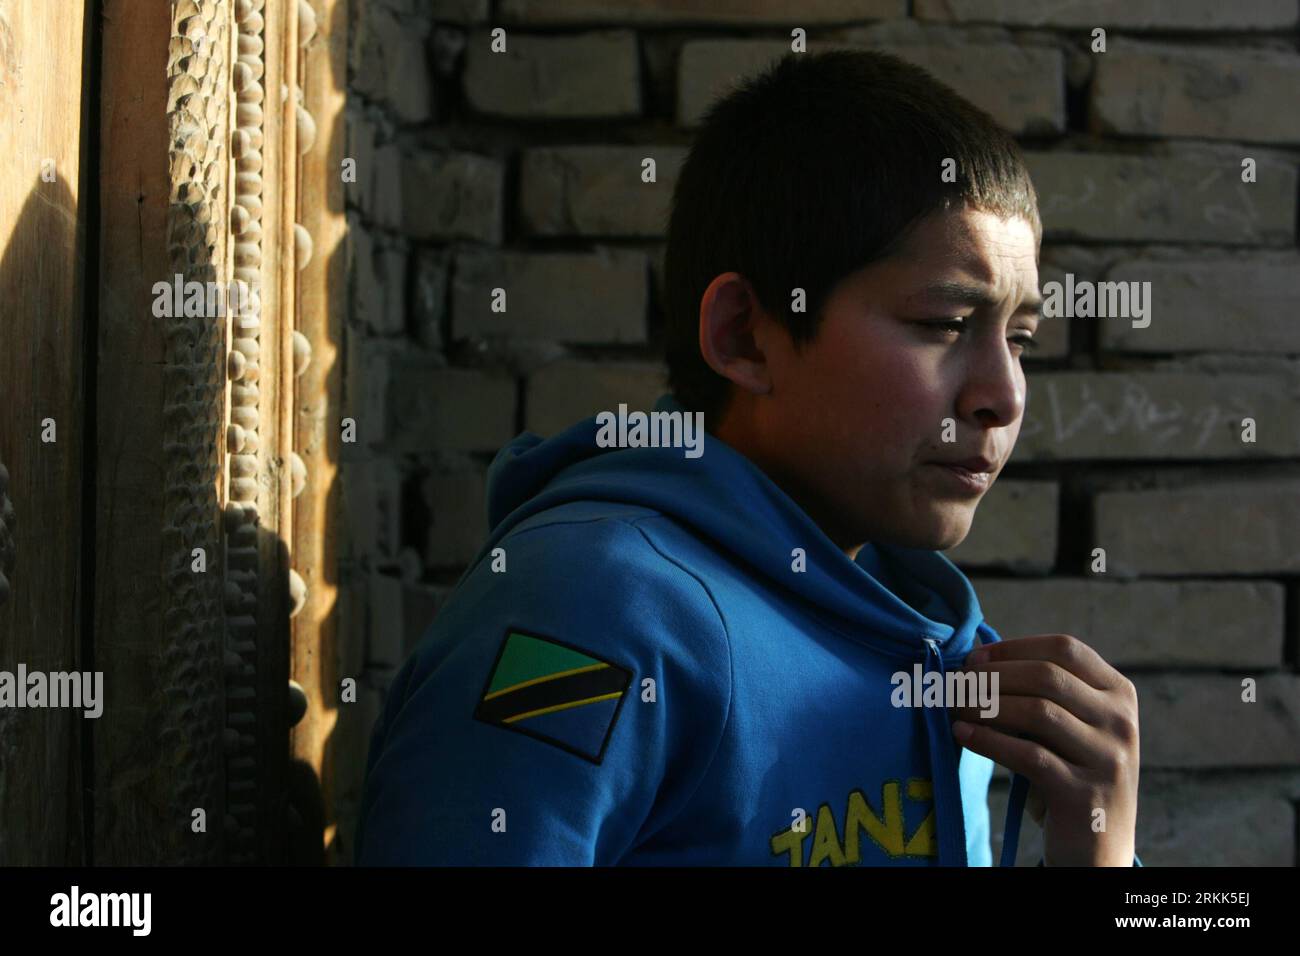 Bildnummer: 56203554  Datum: 21.10.2011  Copyright: imago/Xinhua (111021) -- KASHGAR, Oct. 21, 2011 (Xinhua) -- The 18-year-old vagrant boy Weliy stands at the gate of his home in Yarkant County, northwest China s Xinjiang Uygur Autonomous Region, Oct. 18, 2011. I want to have a happy family , said Amangul, a 16-year-old vagrant child who has been rescued from southwest China s Kunming City. In the first ten months of 2011, the relief management station in Kashgar has brought 221 native Xinjiang children back. The little girl Amangul and other nine children, who are aged between 15 and 19, wer Stock Photo